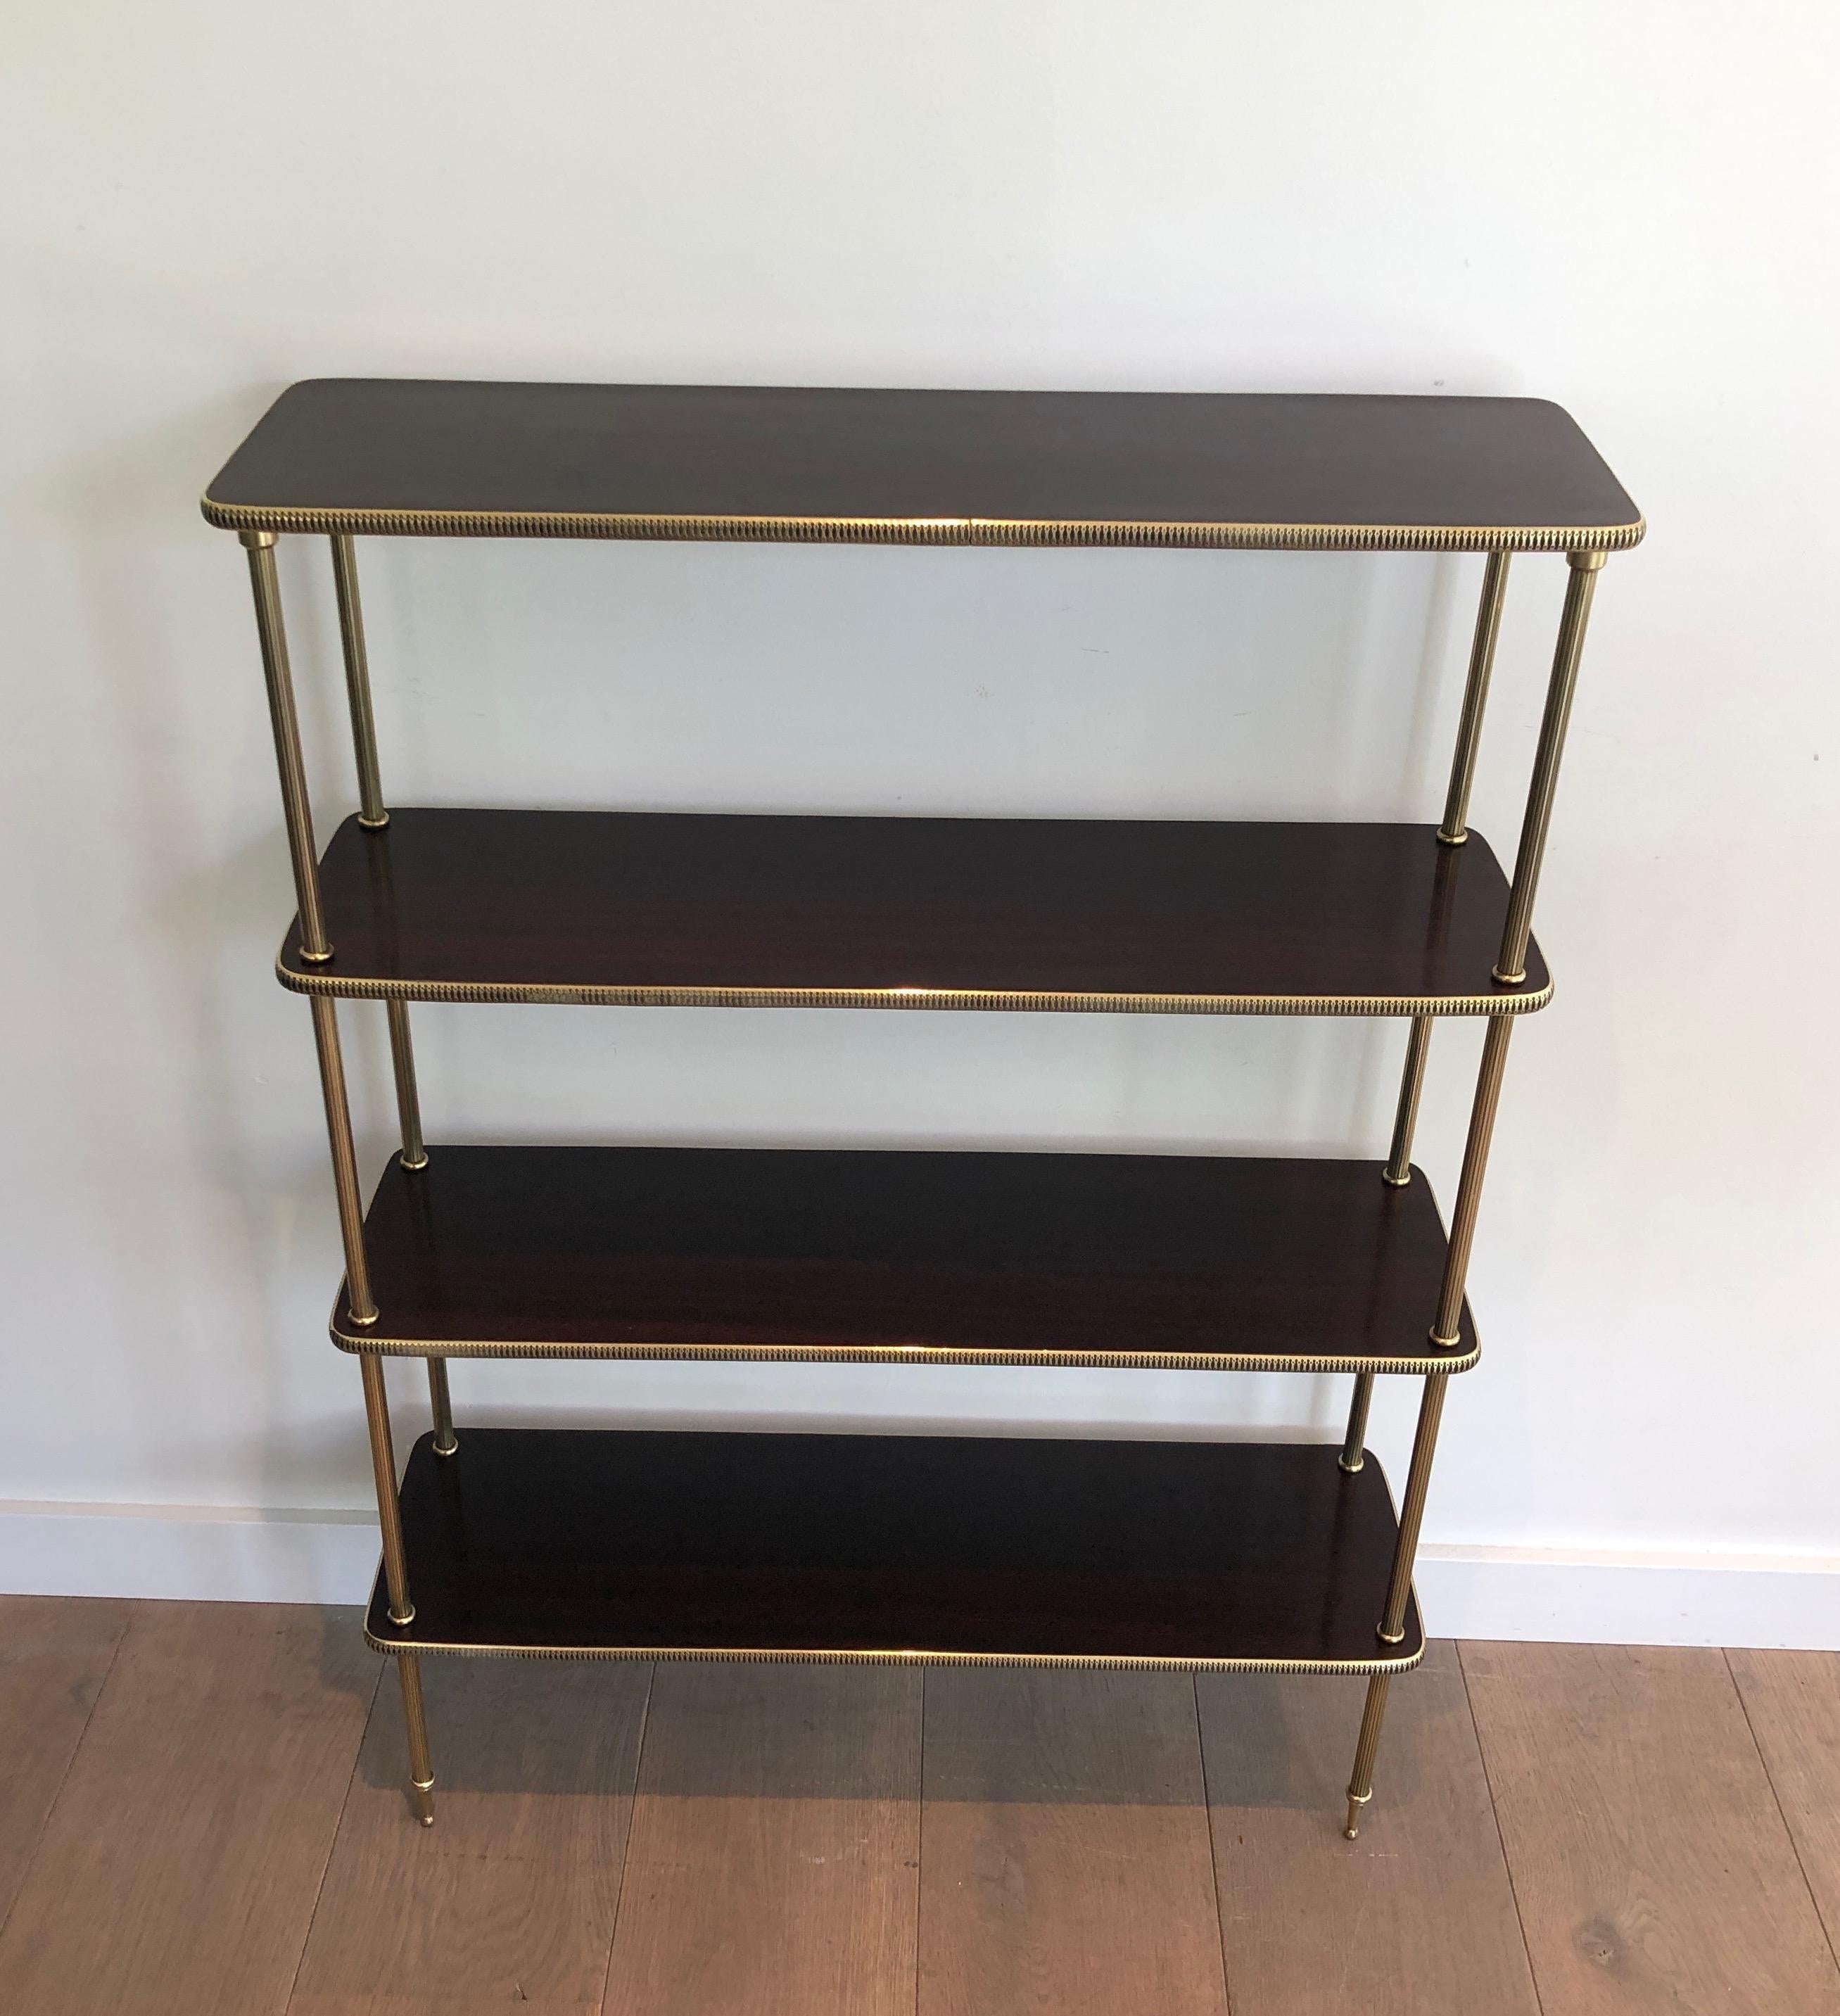 This neoclassical style shelves unit is made of mahogany and brass. This is a very elegant bookcase with 4 mahogany shelves surrounded by a brass gallery. This is a French work, circa 1940.